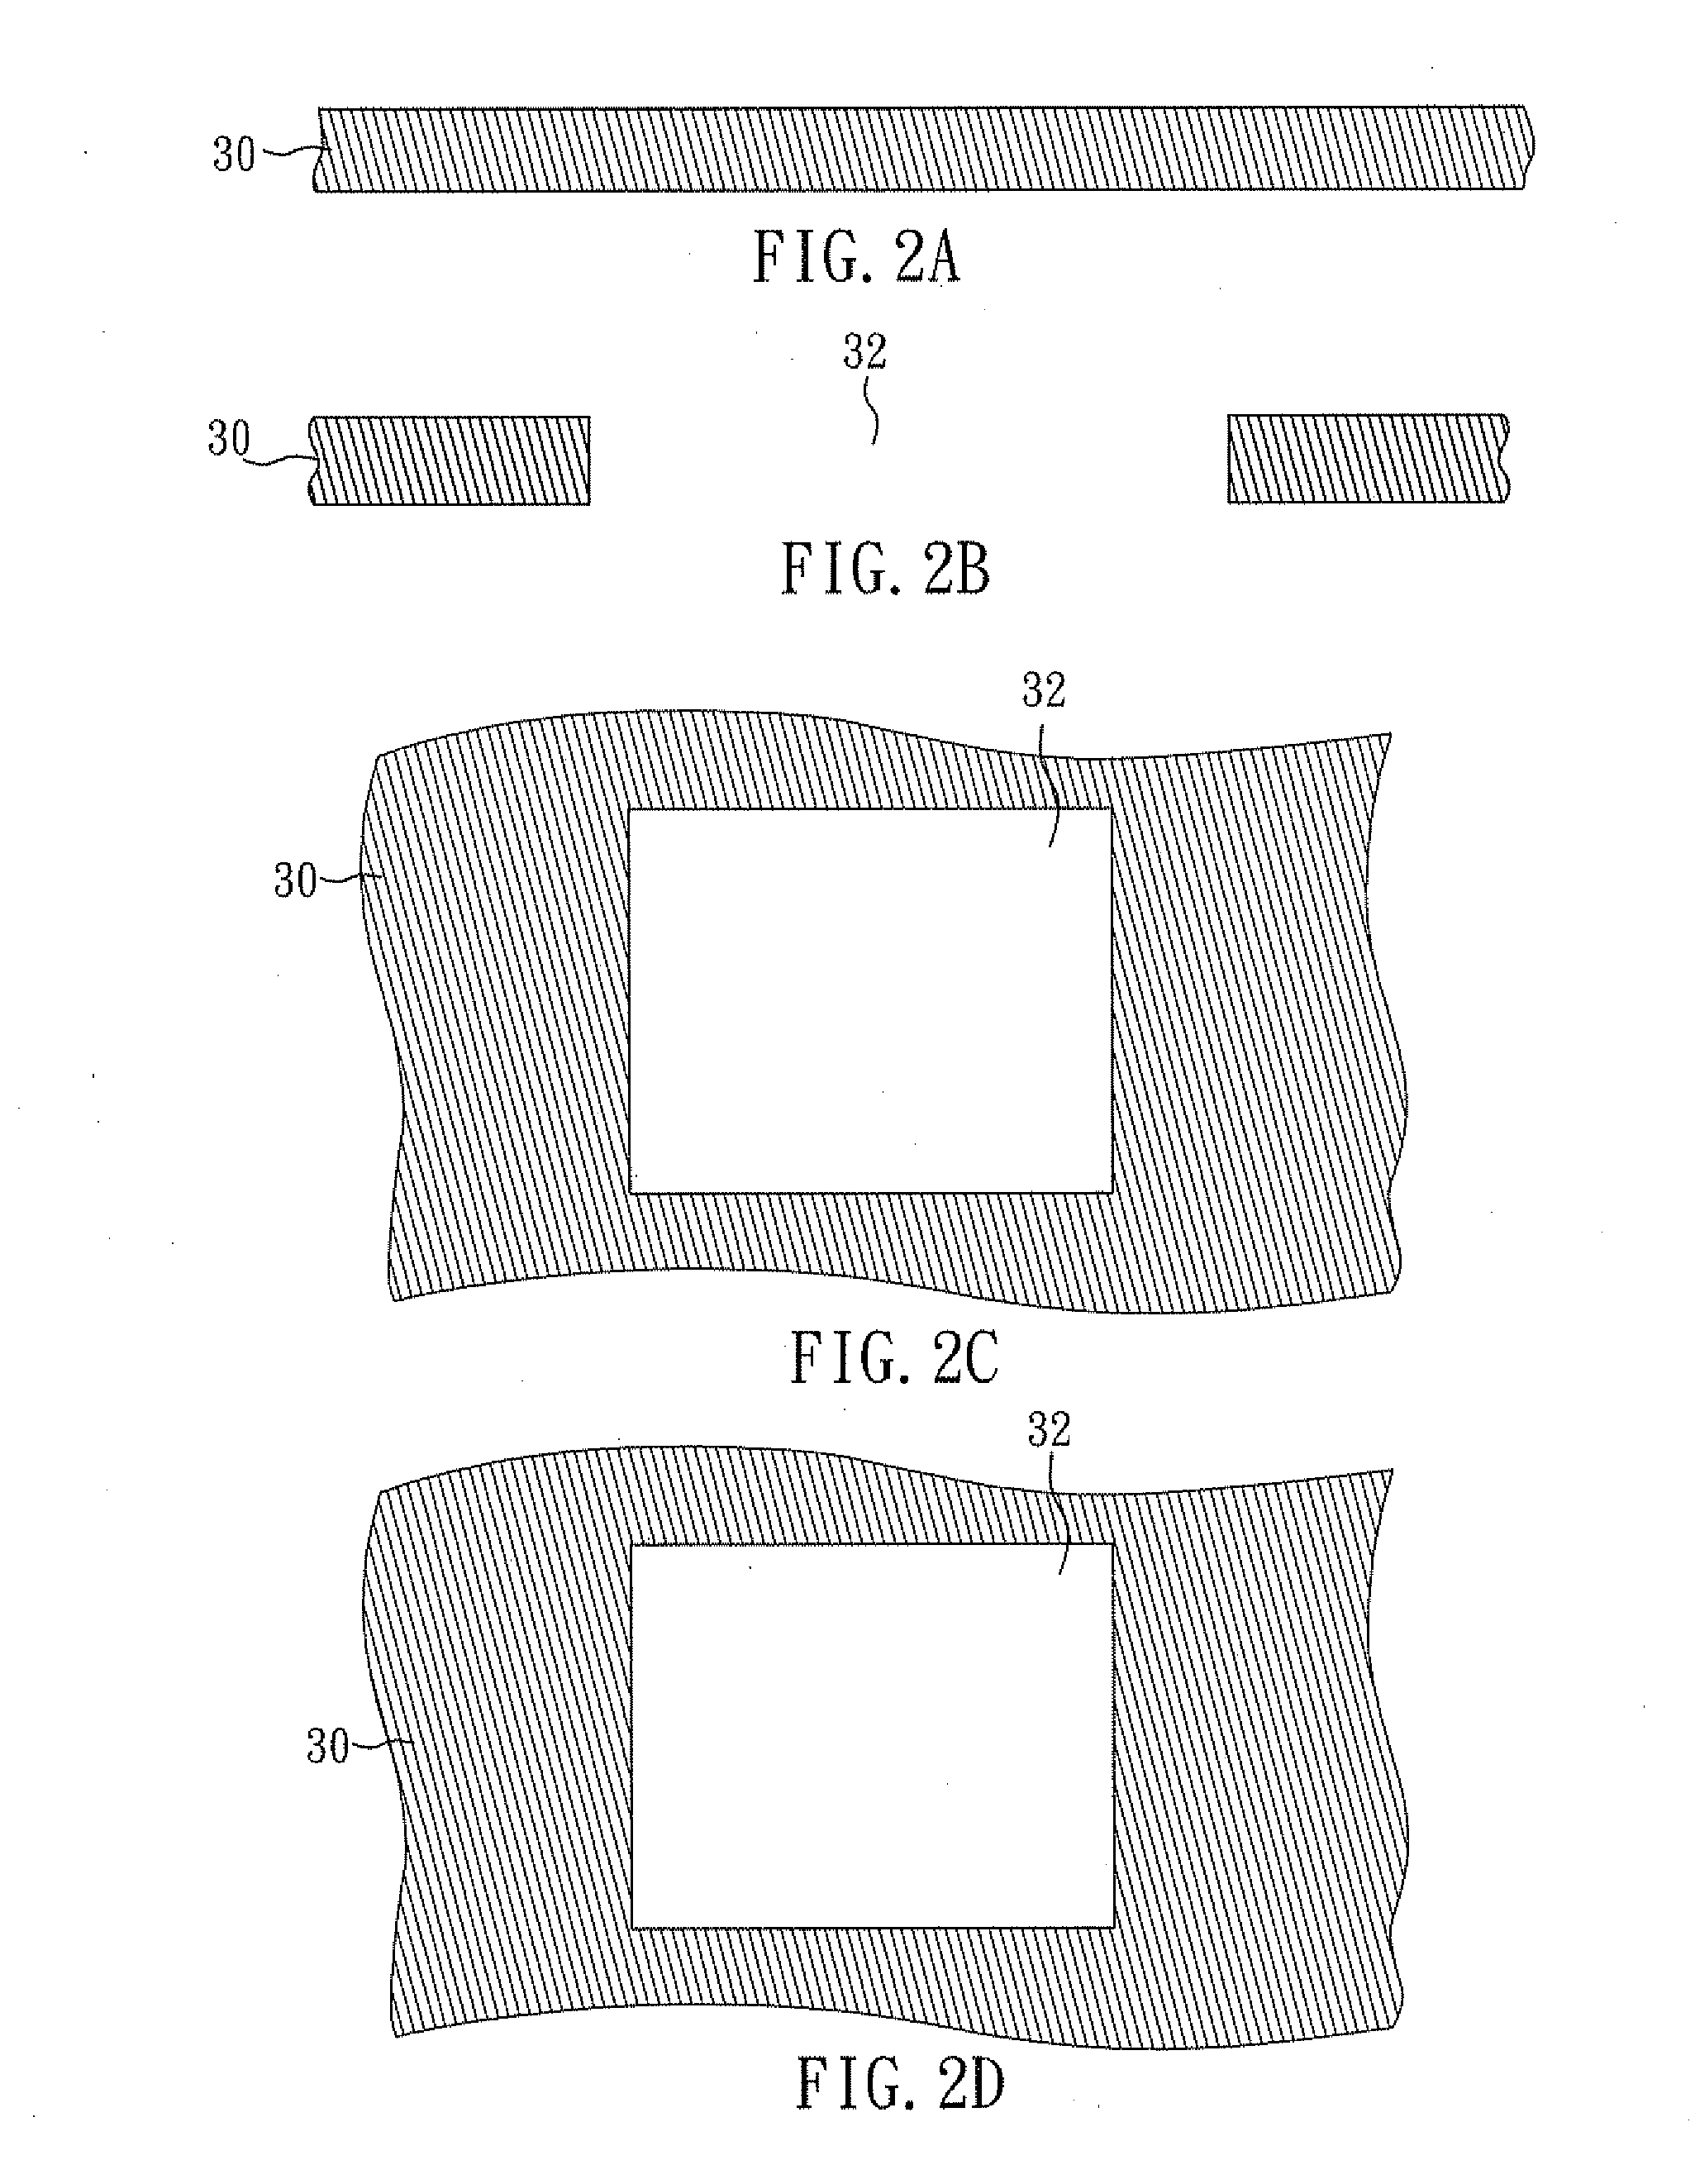 Stackable semiconductor assembly with bump/base/flange heat spreader and electromagnetic shielding